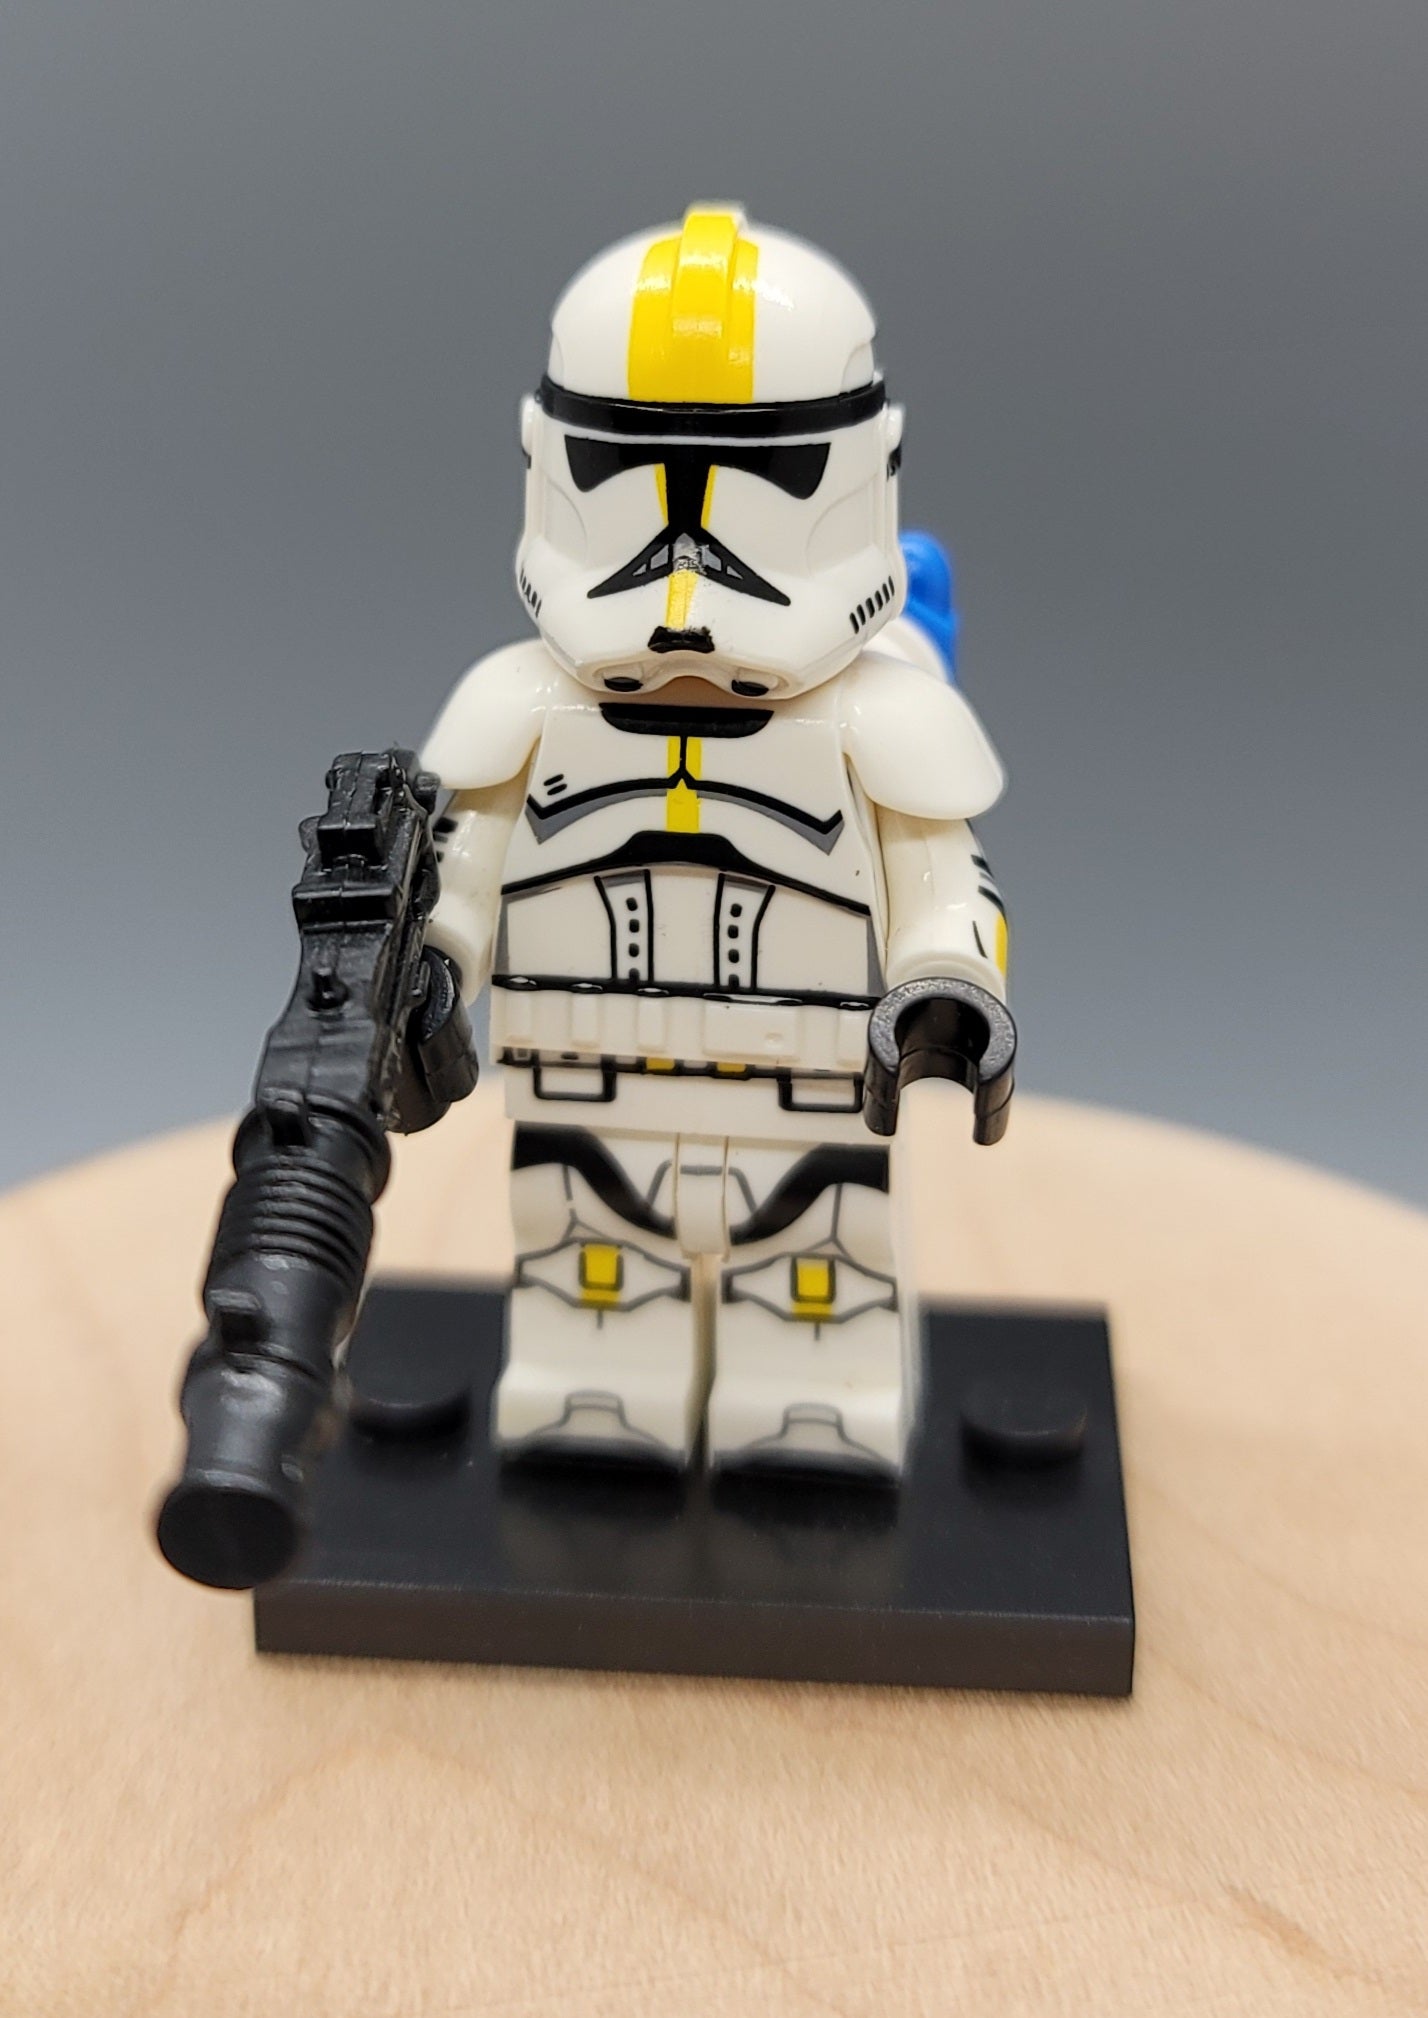 Clone Trooper 327 Reigment Custom minifigure. Brand new in package. Please visit shop, lots more!